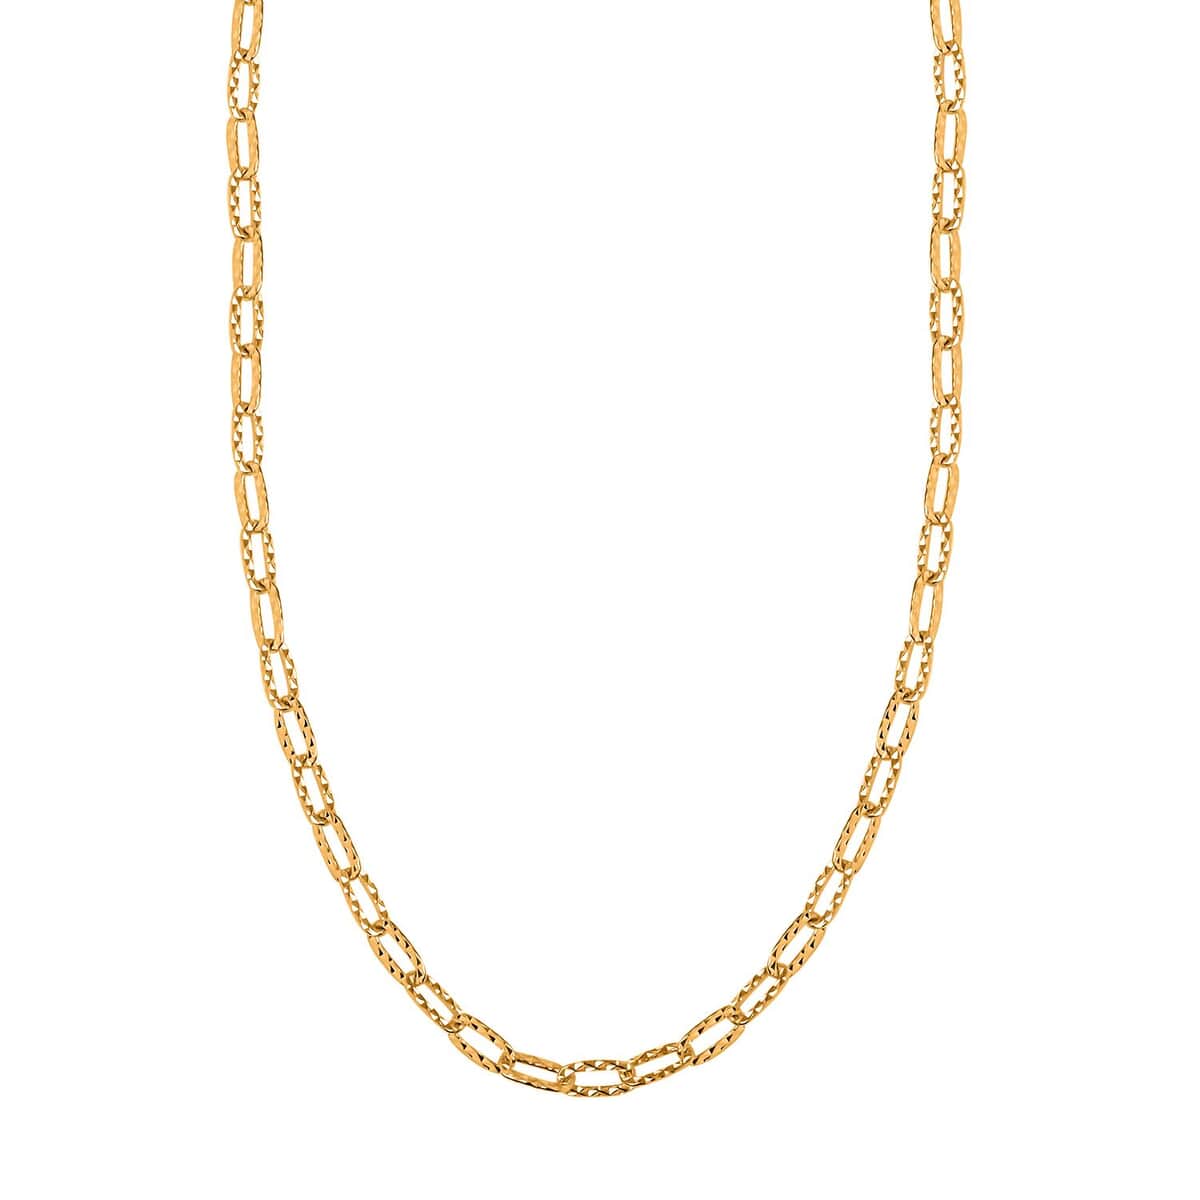 24K Yellow Gold Link Chain Necklace 18 Inches 5.75 Grams image number 3